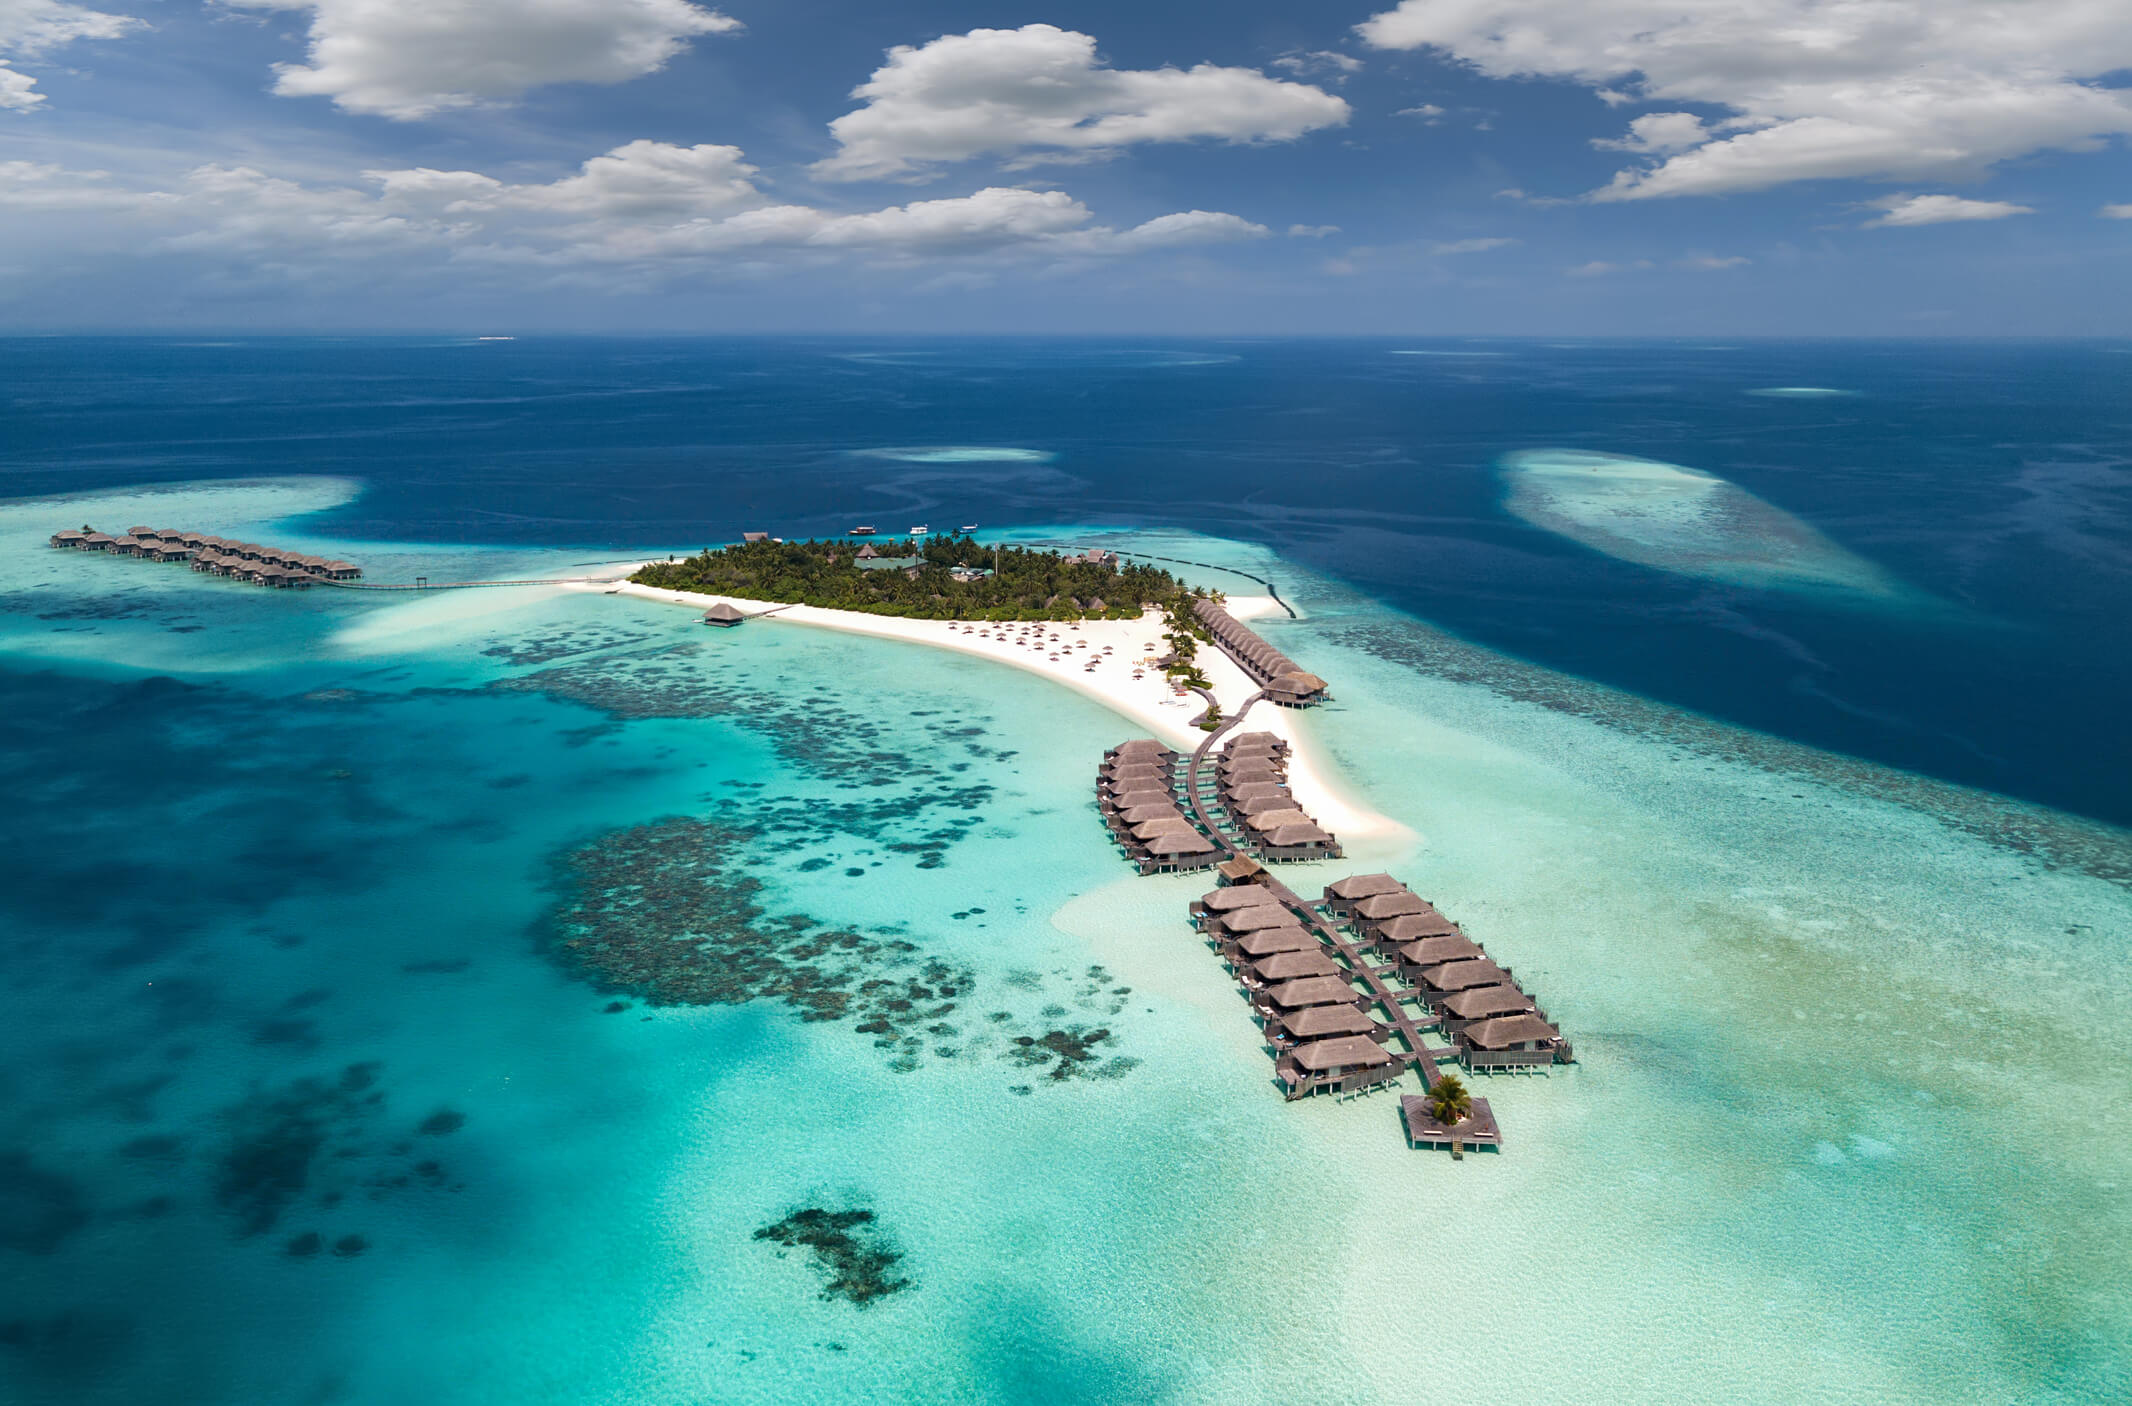 Aerial view of island village in Maldives. Photo: EyeEm / Getty Images